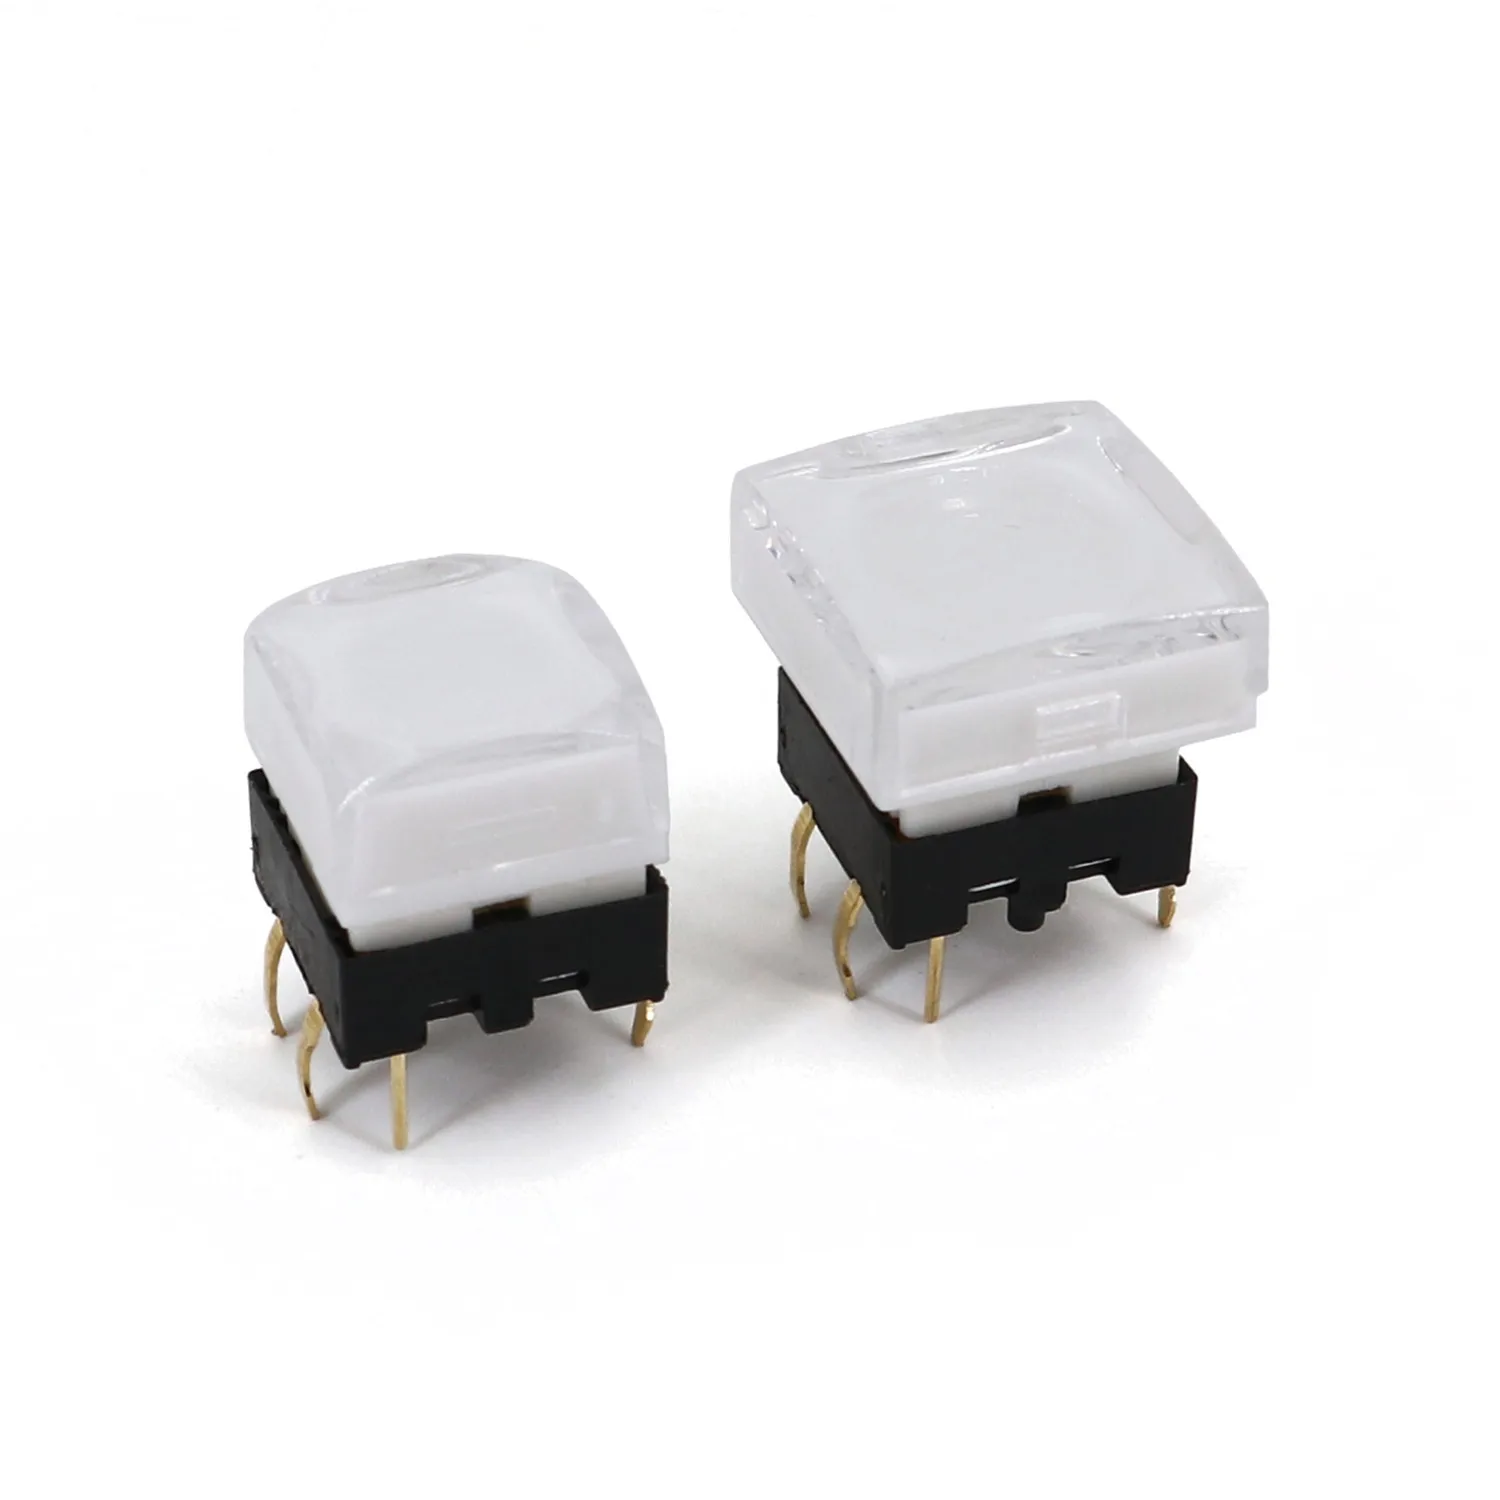 Honyone TS26 Series Square With LED Momentary SPST PCB Mini Push Button Tact Switch For Video Processor